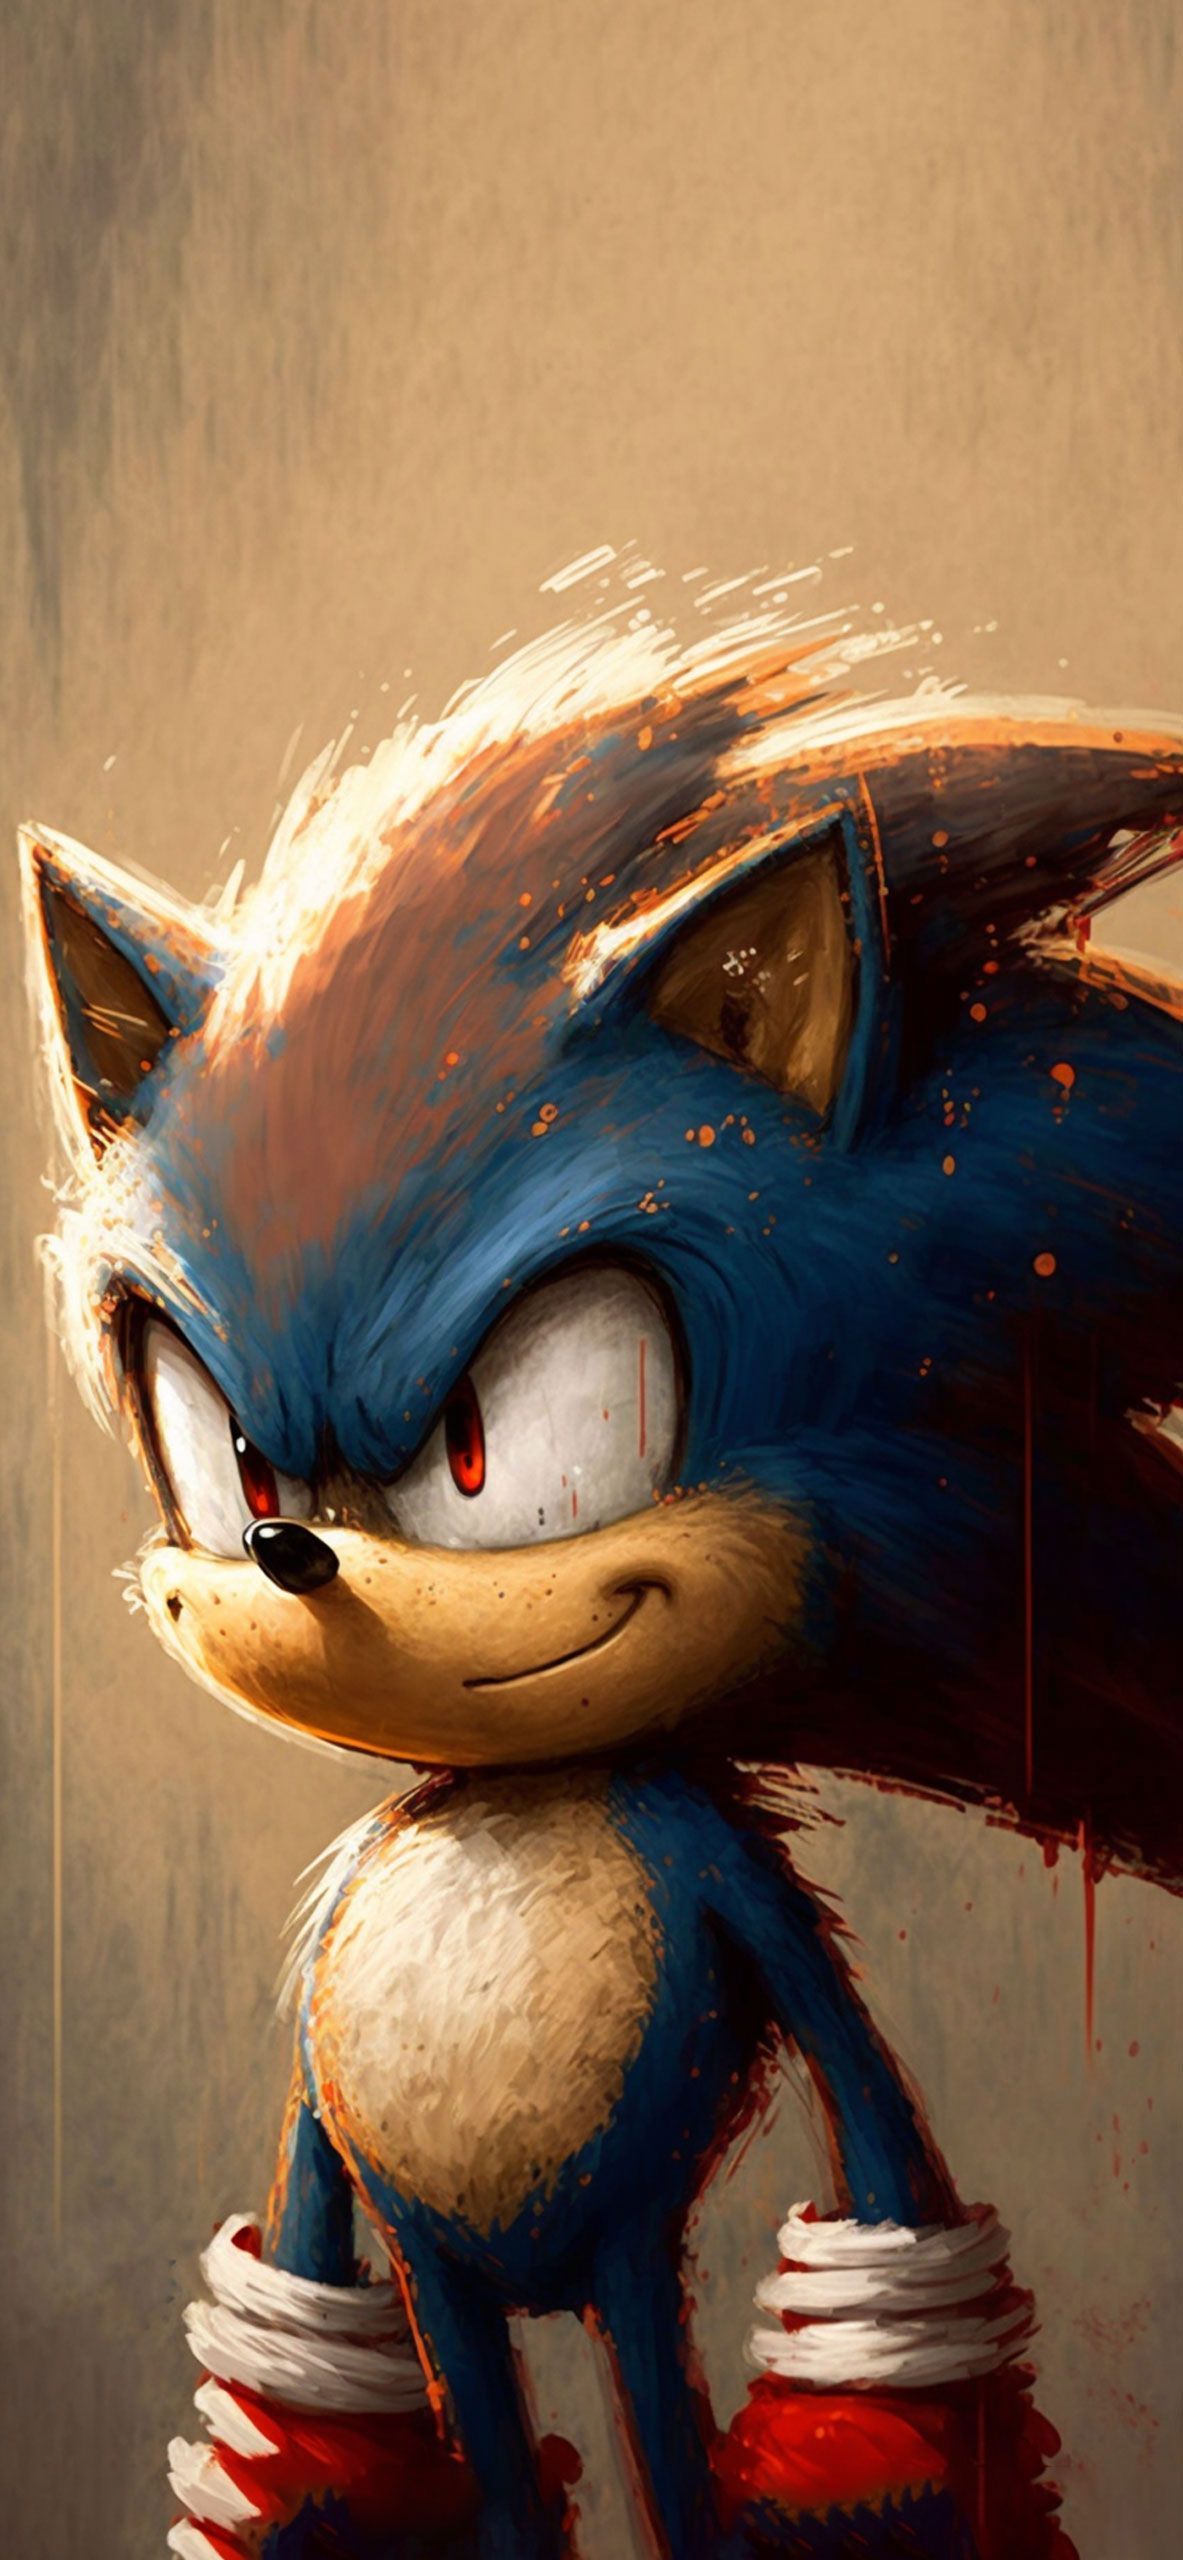 Iphone wallpaper sonic the hedgehog, Sonic the hedgehog, Art, 4k, iPhone wallpaper, 4k wallpaper, 1242x2688 wallpaper - Sonic, Android